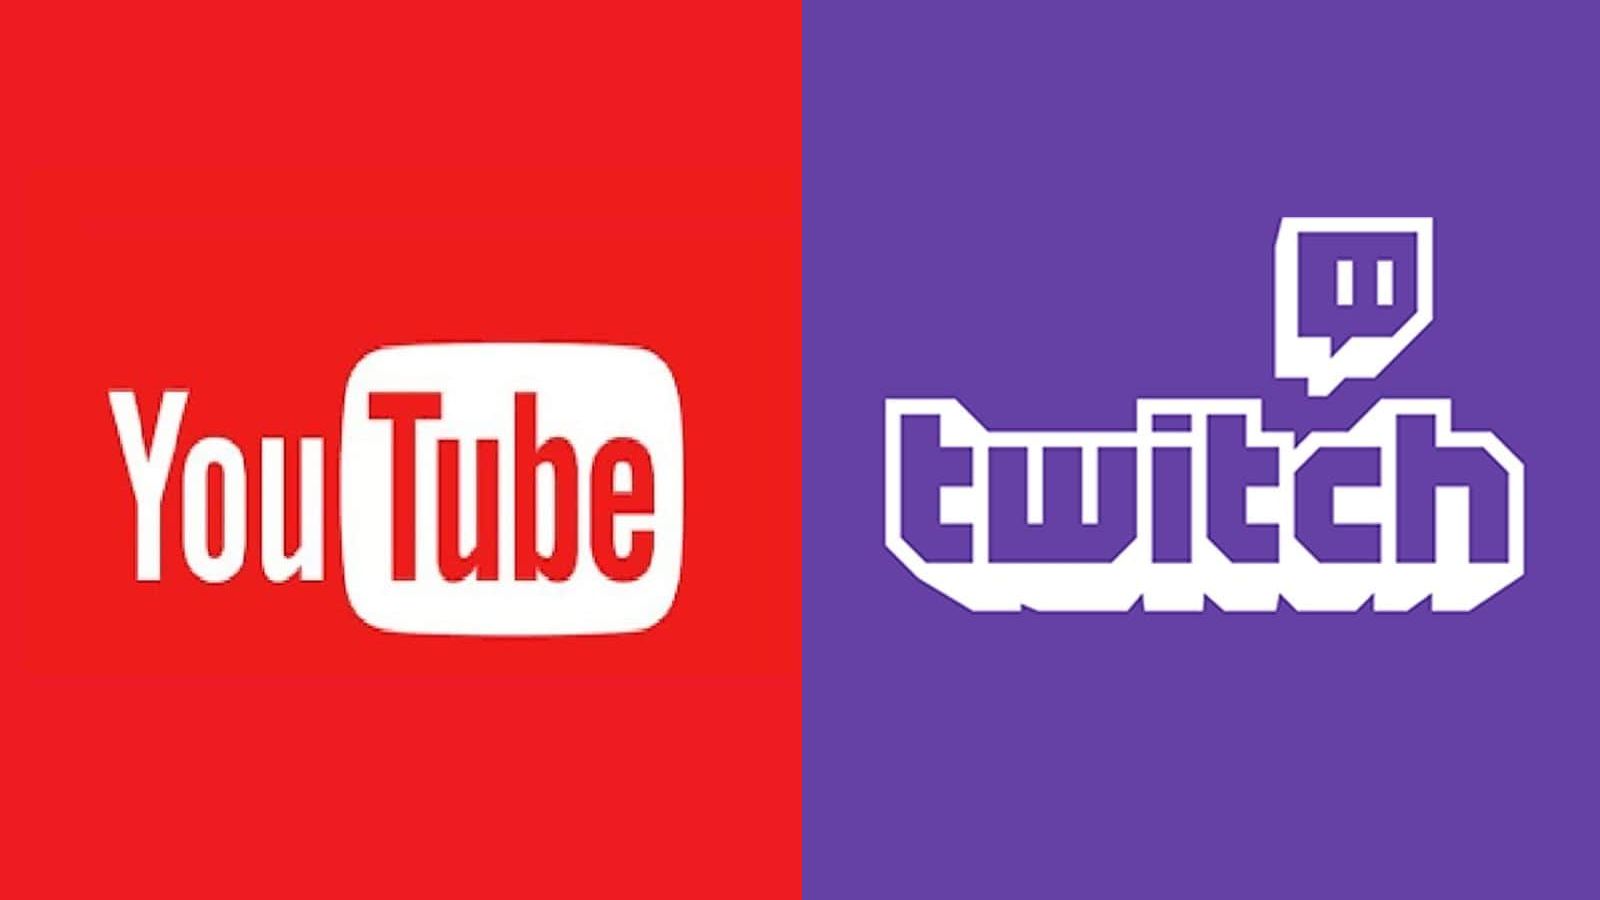 youtube and twitch logos